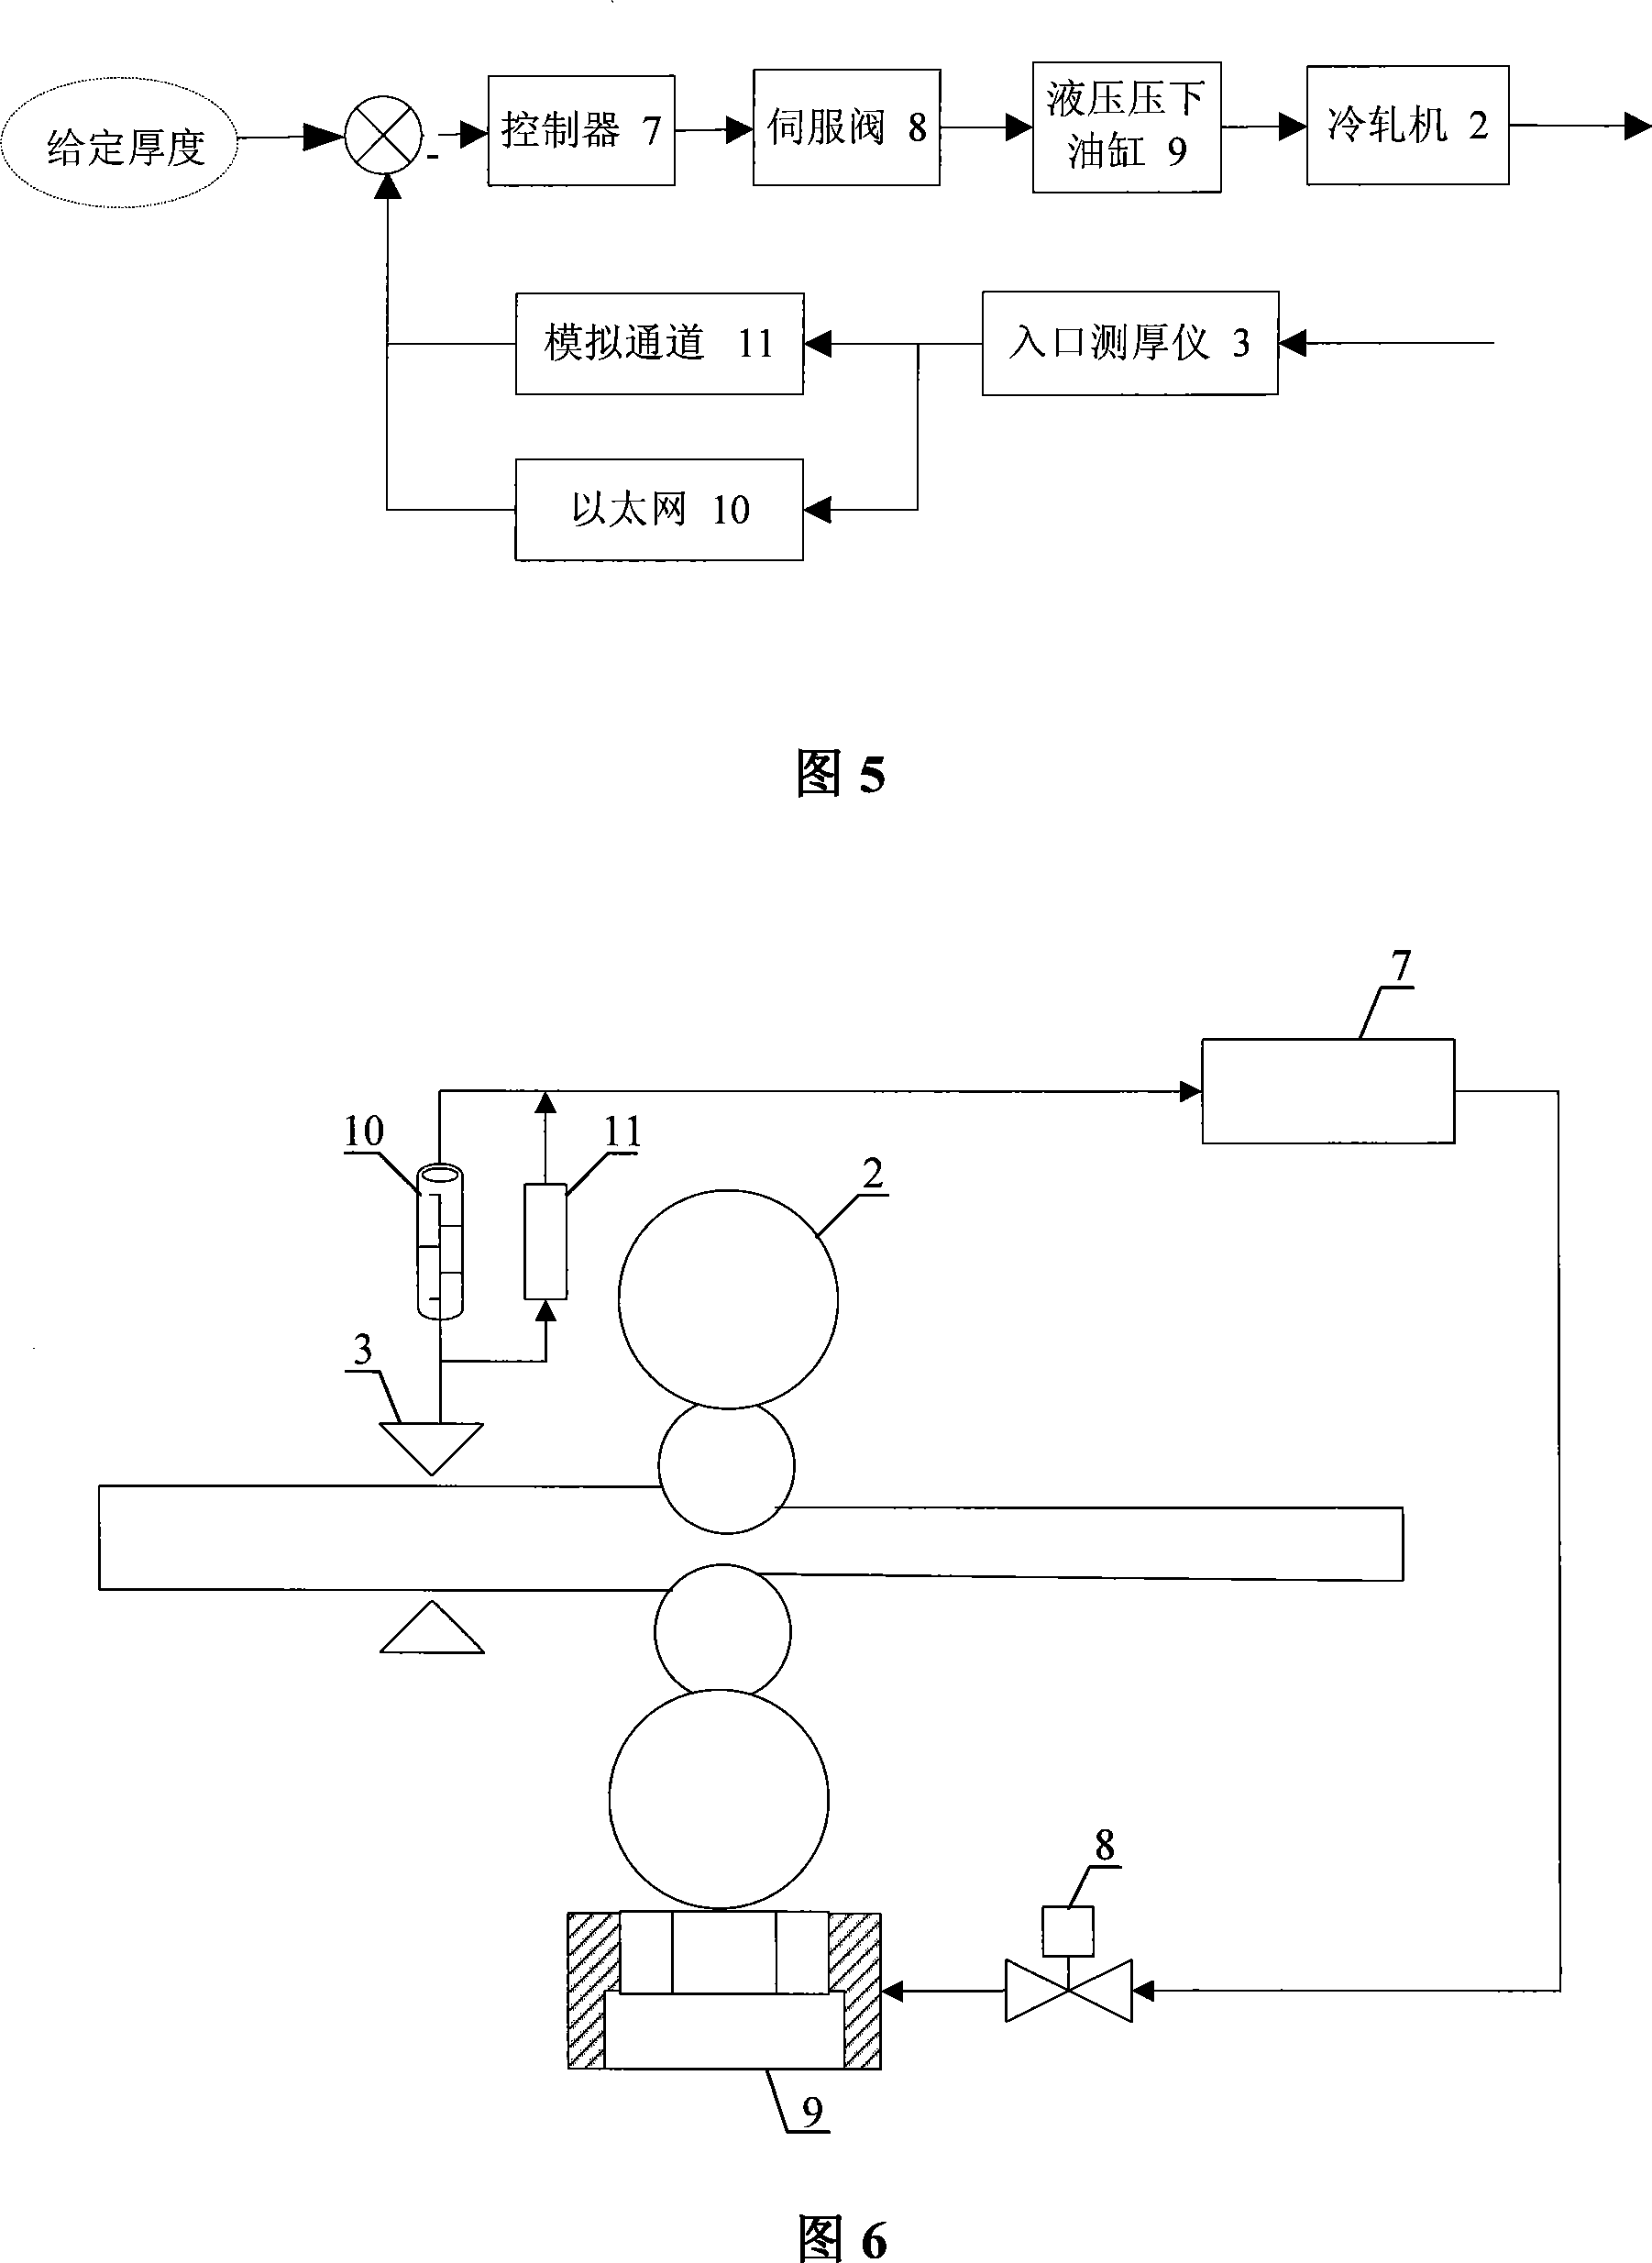 Method for improving cold rolling mill thickness control performance using feedforward network